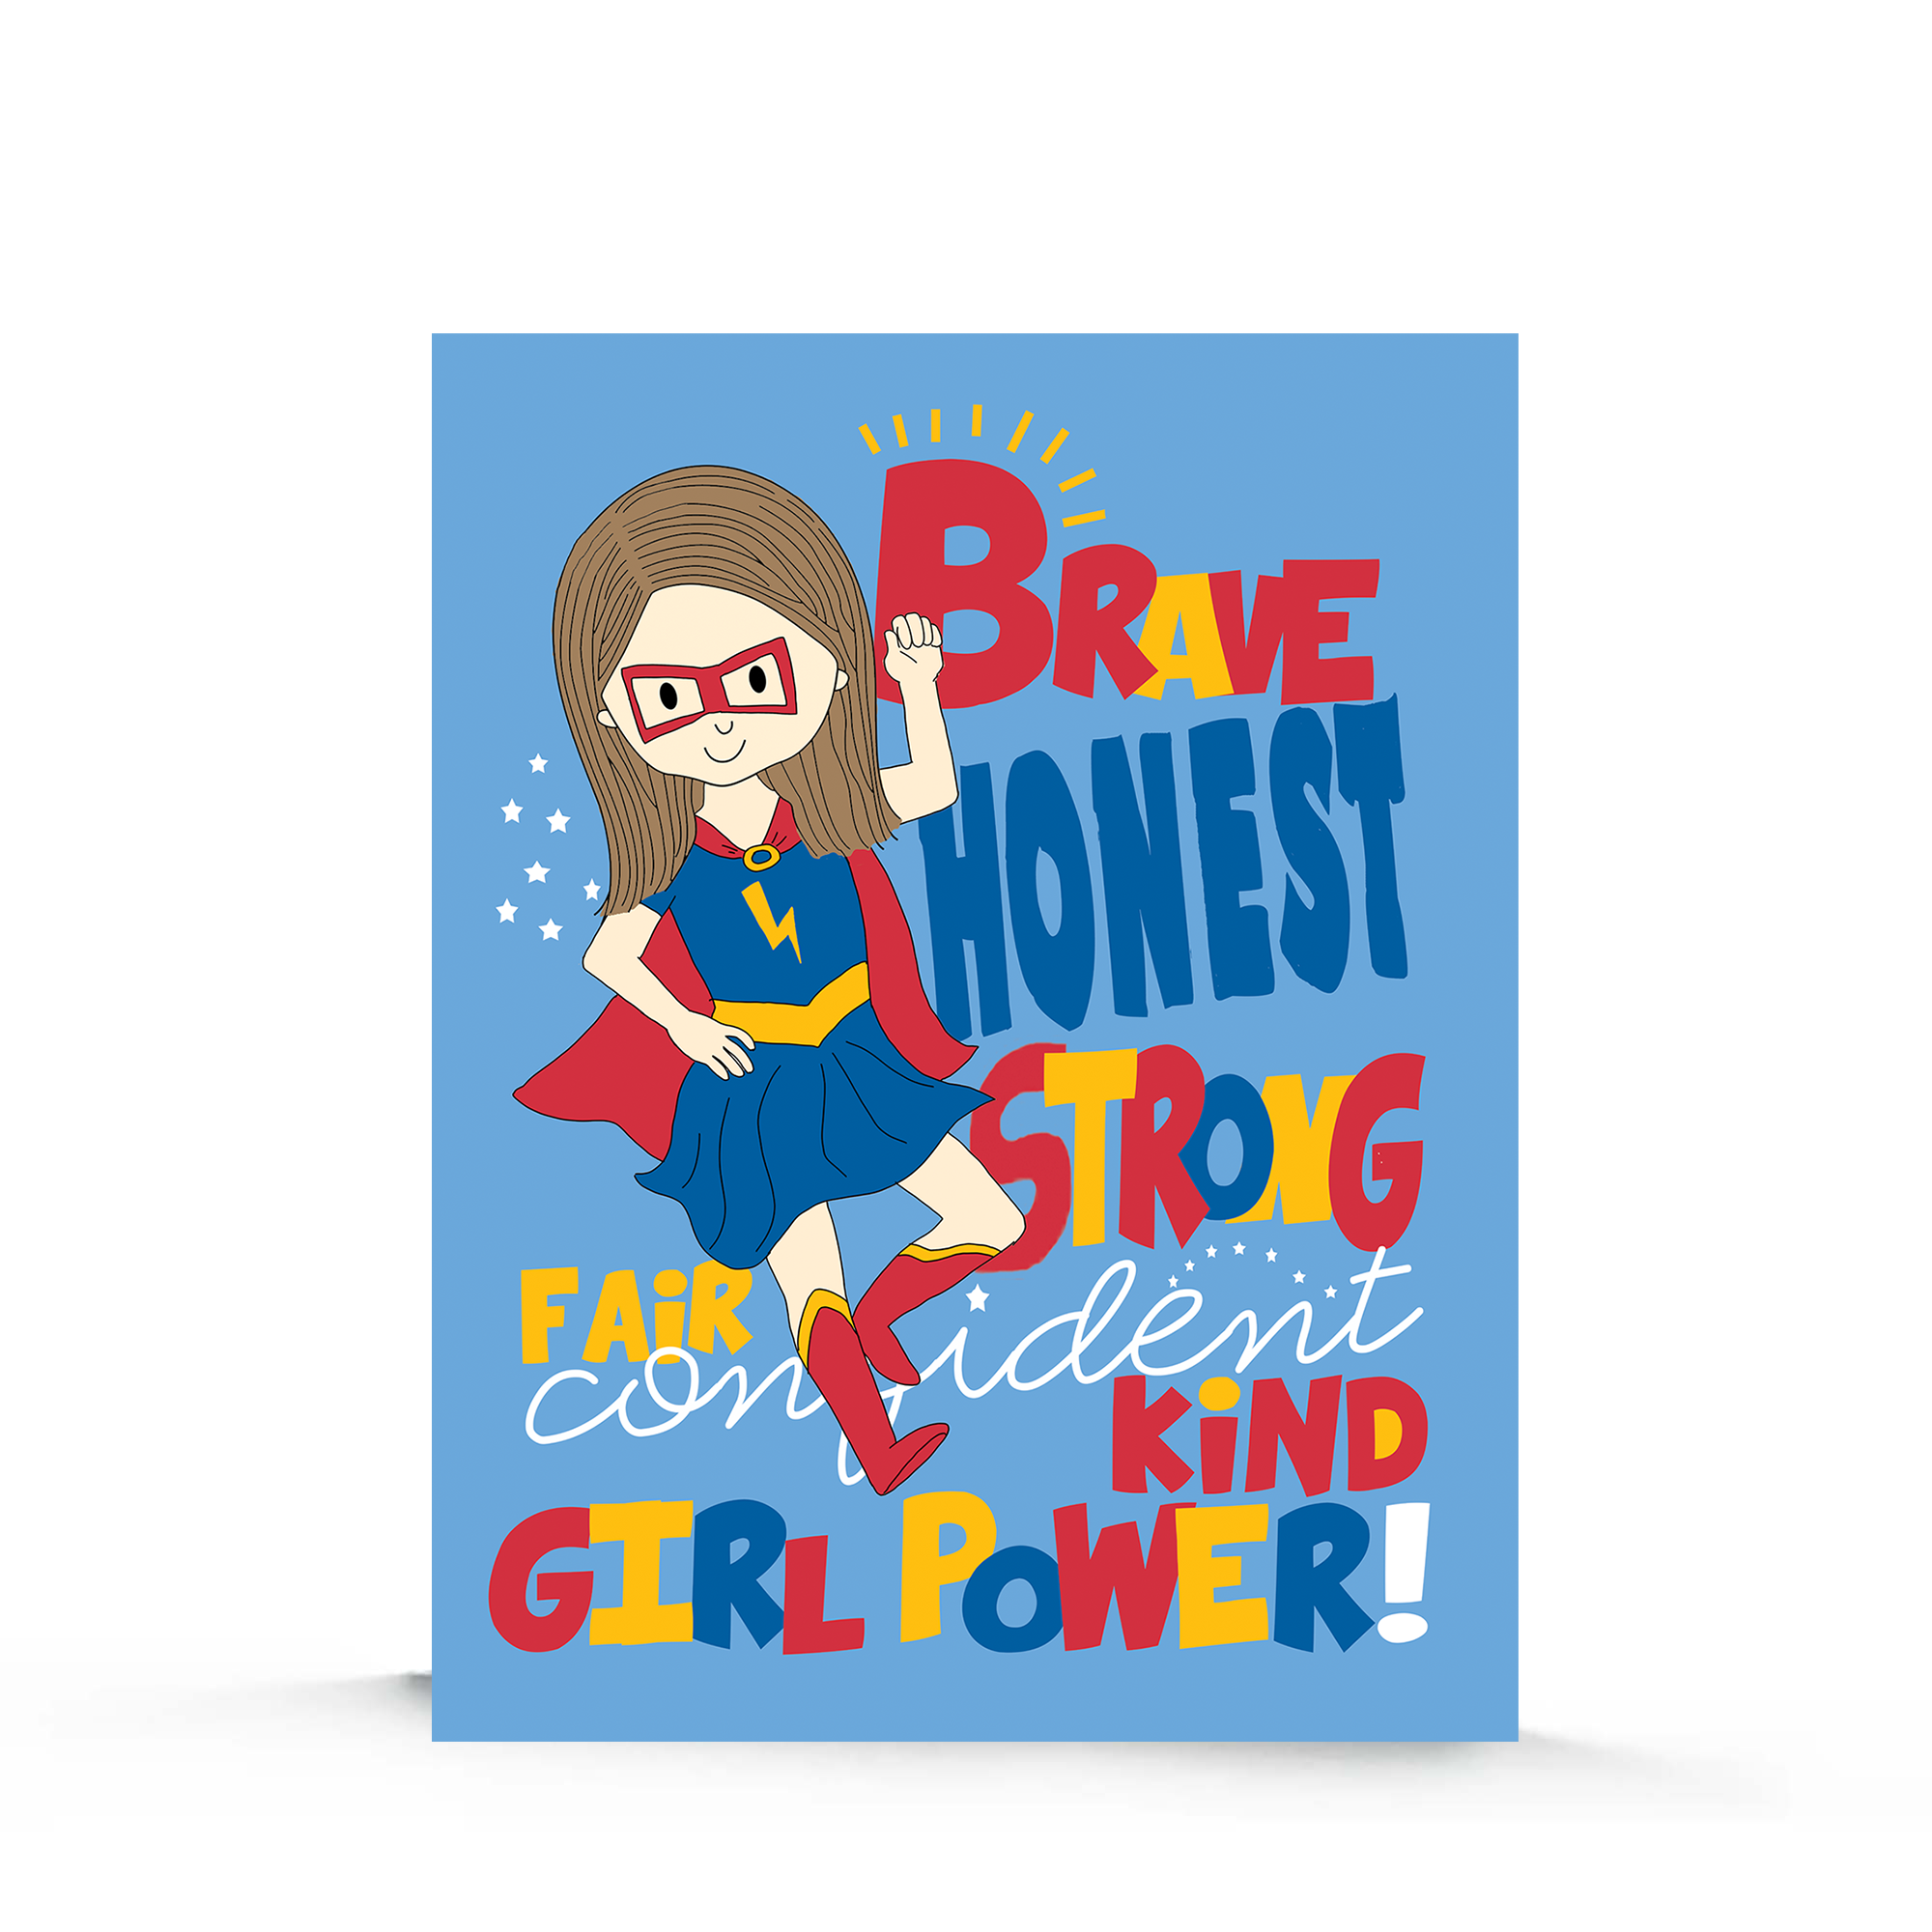 Girl Power Birthday Card | Birthday Cards for Girls | Superhero Birthday Card | Superhero Birthday | Empower Girls | Girl with a Cape